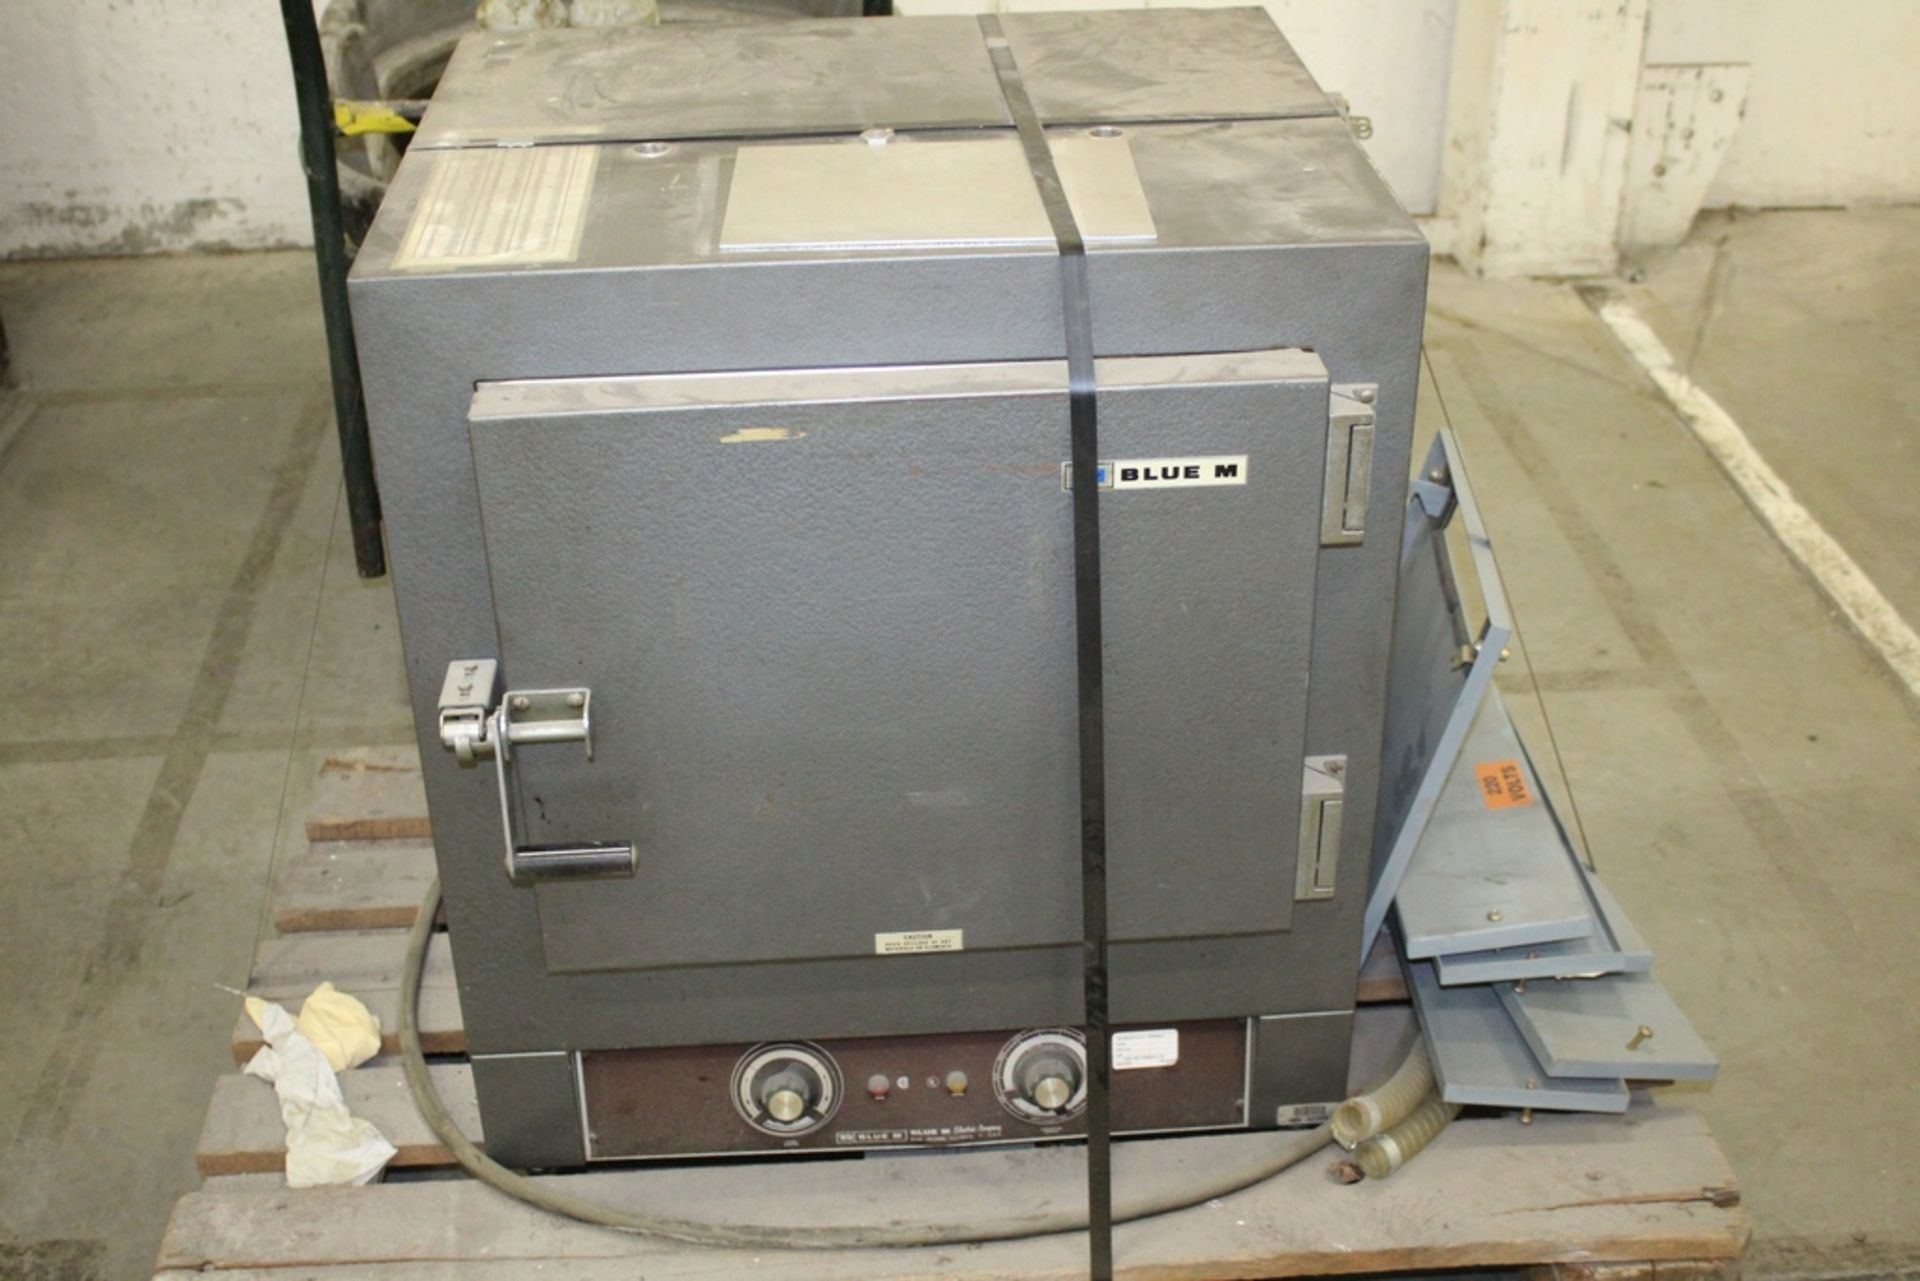 BLUE M BENCH TOP ELECTRIC LAB OVEN 26" X 22" X 28"